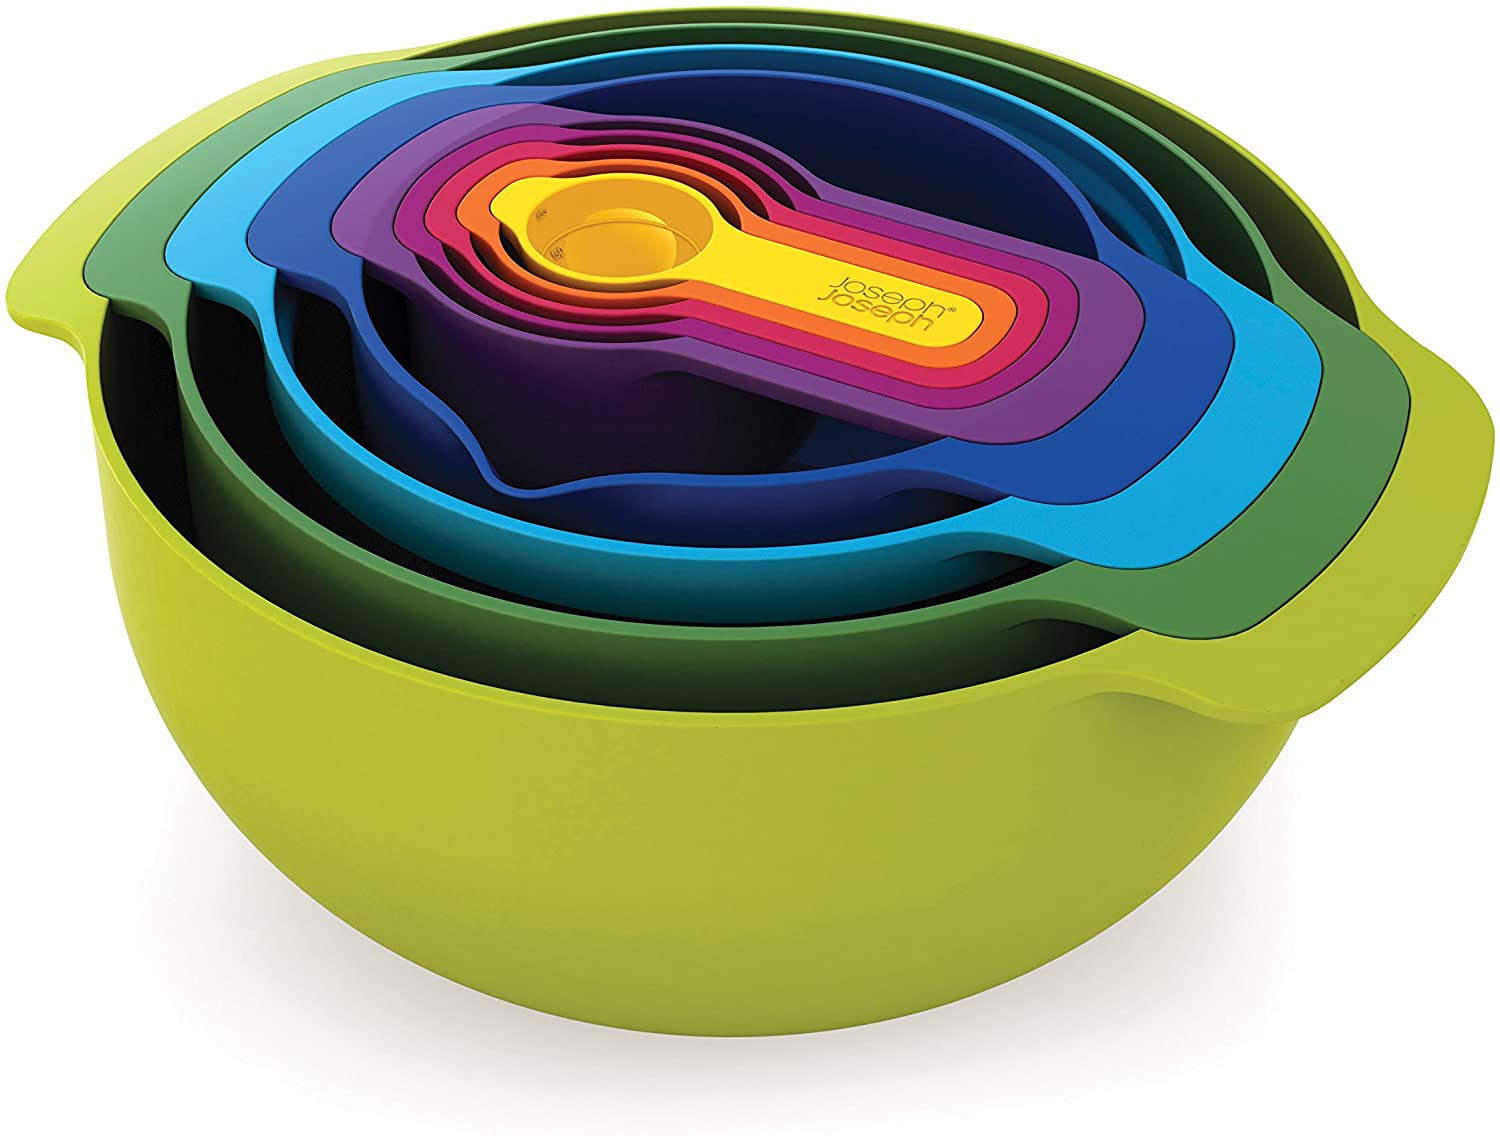  Joseph Joseph Duo 6-Piece Compact Food Preparation Set with  Mixing Bowls, Measuring Cups and Colander, Multicolour: Home & Kitchen